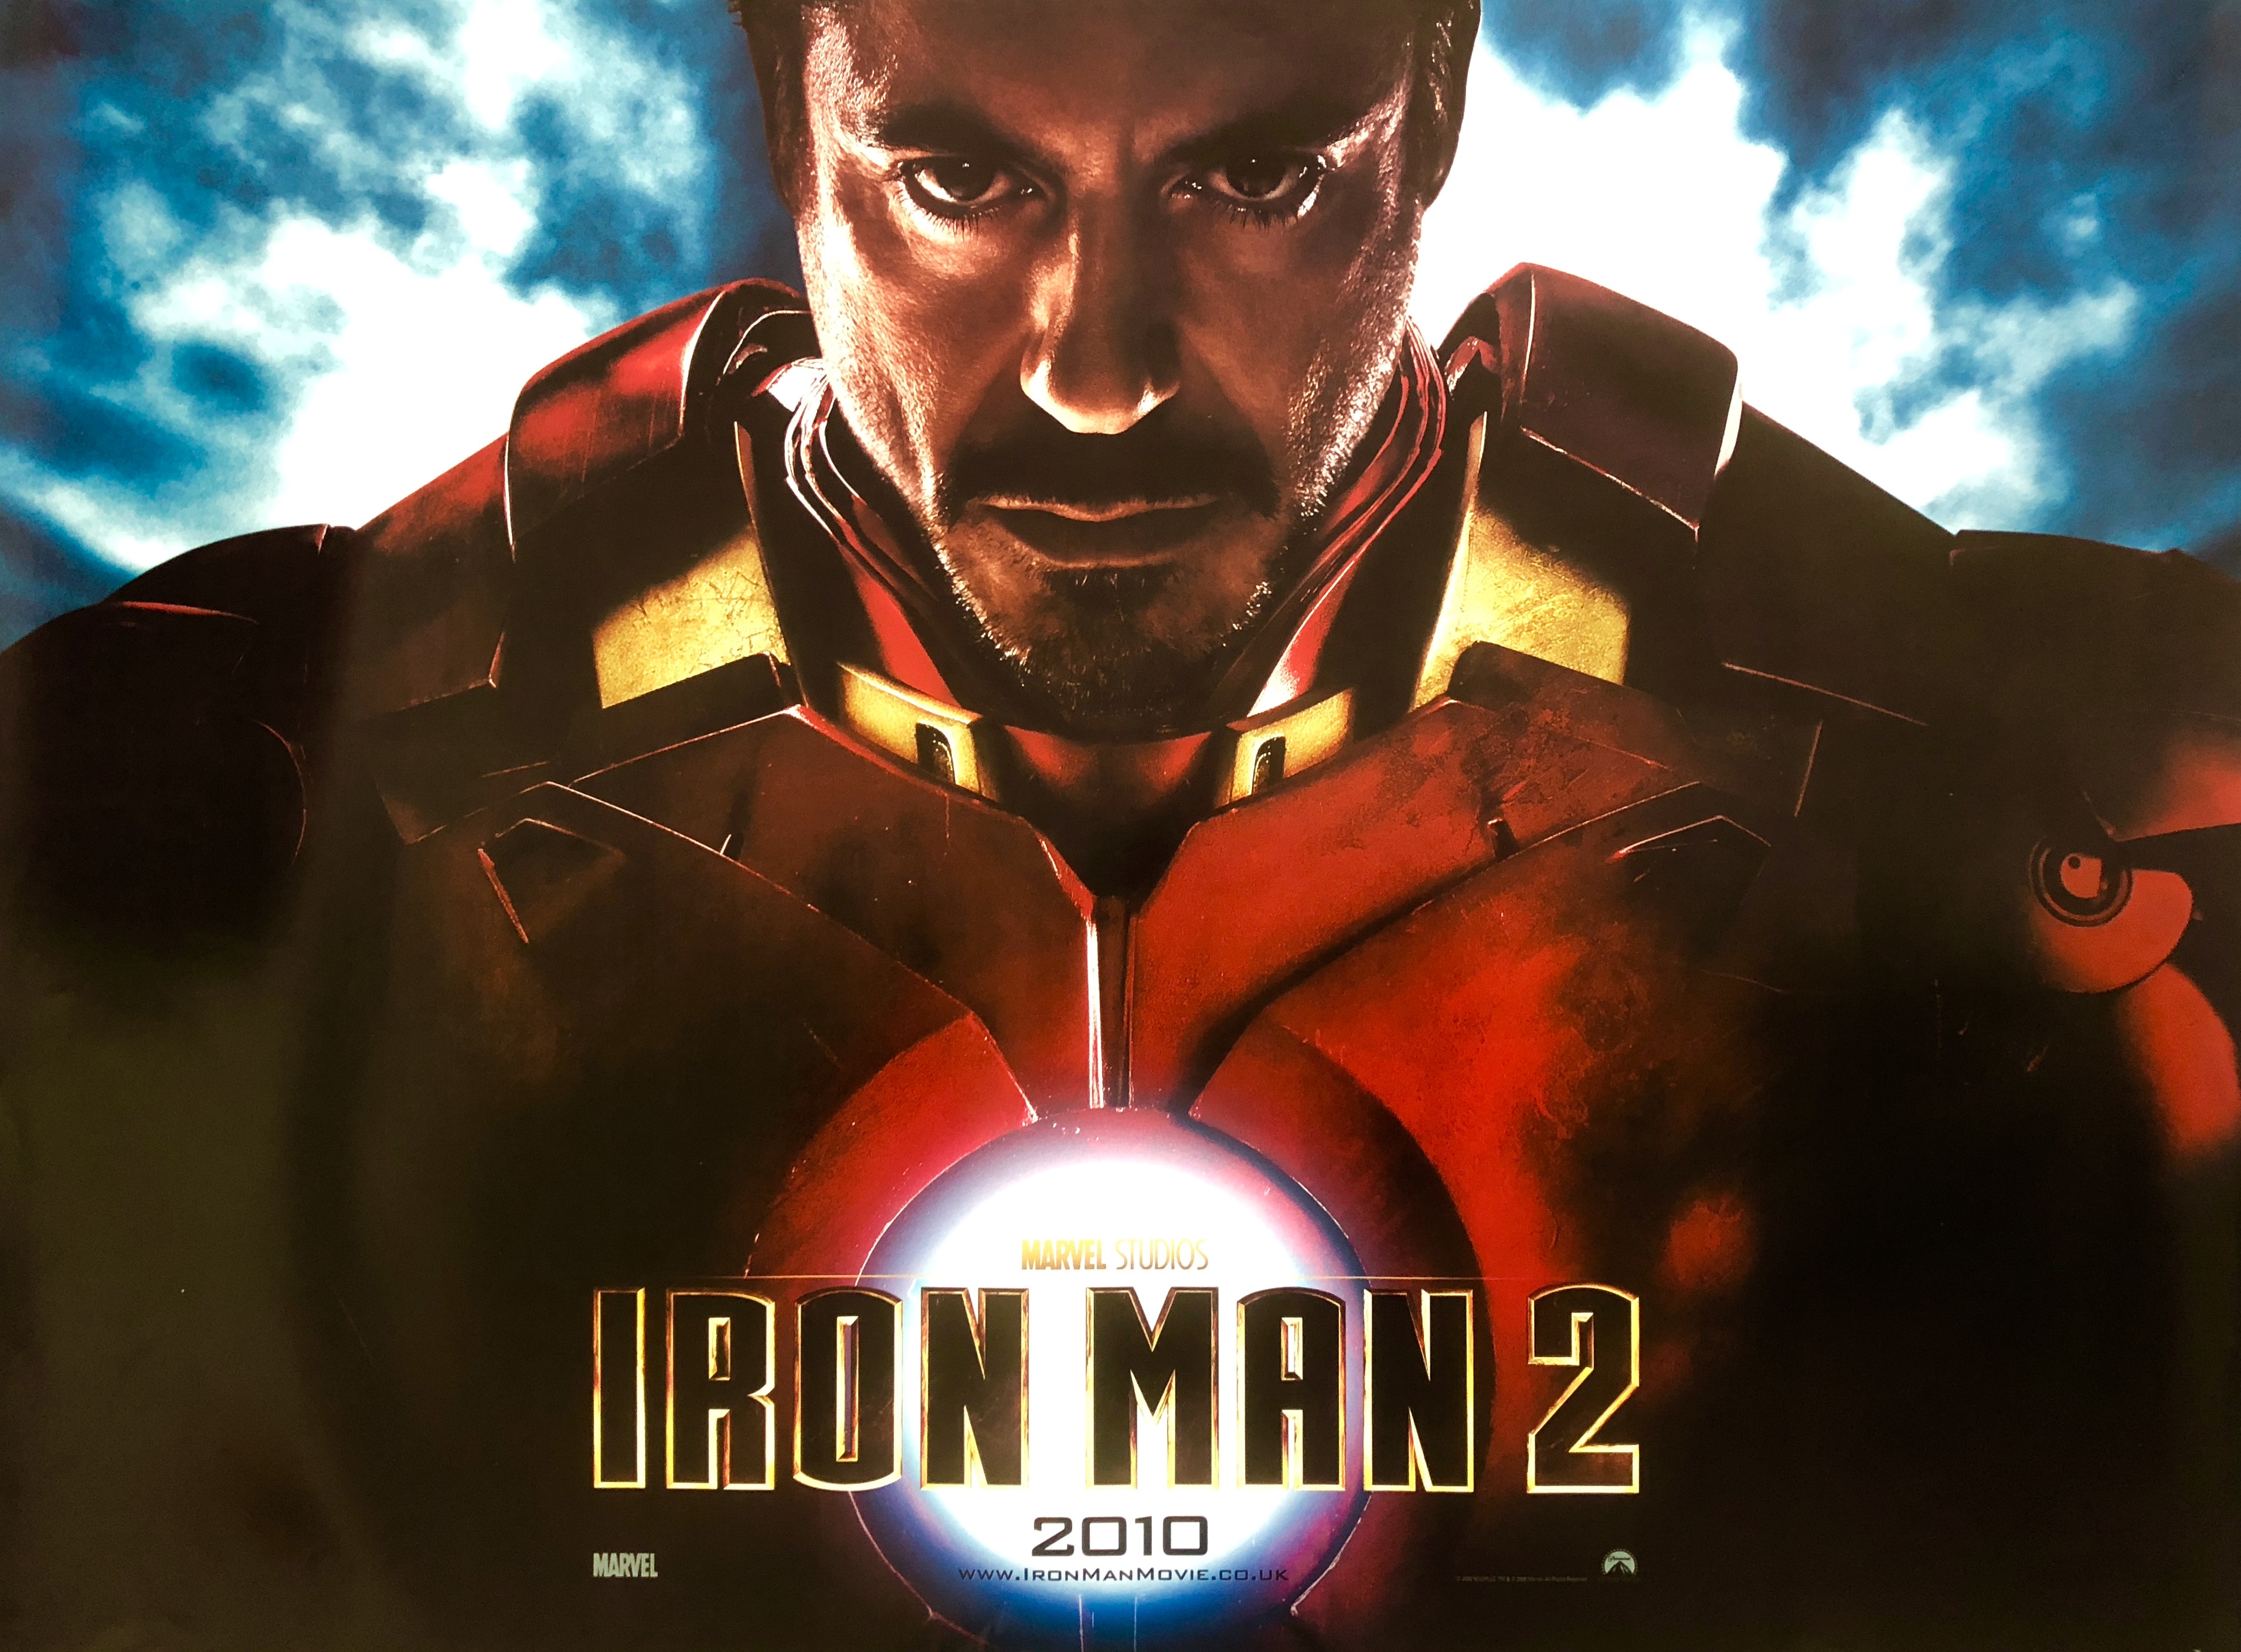 Iron Man Teaser Two Sided 27"x40' inches Original Movie Poster by Marvel